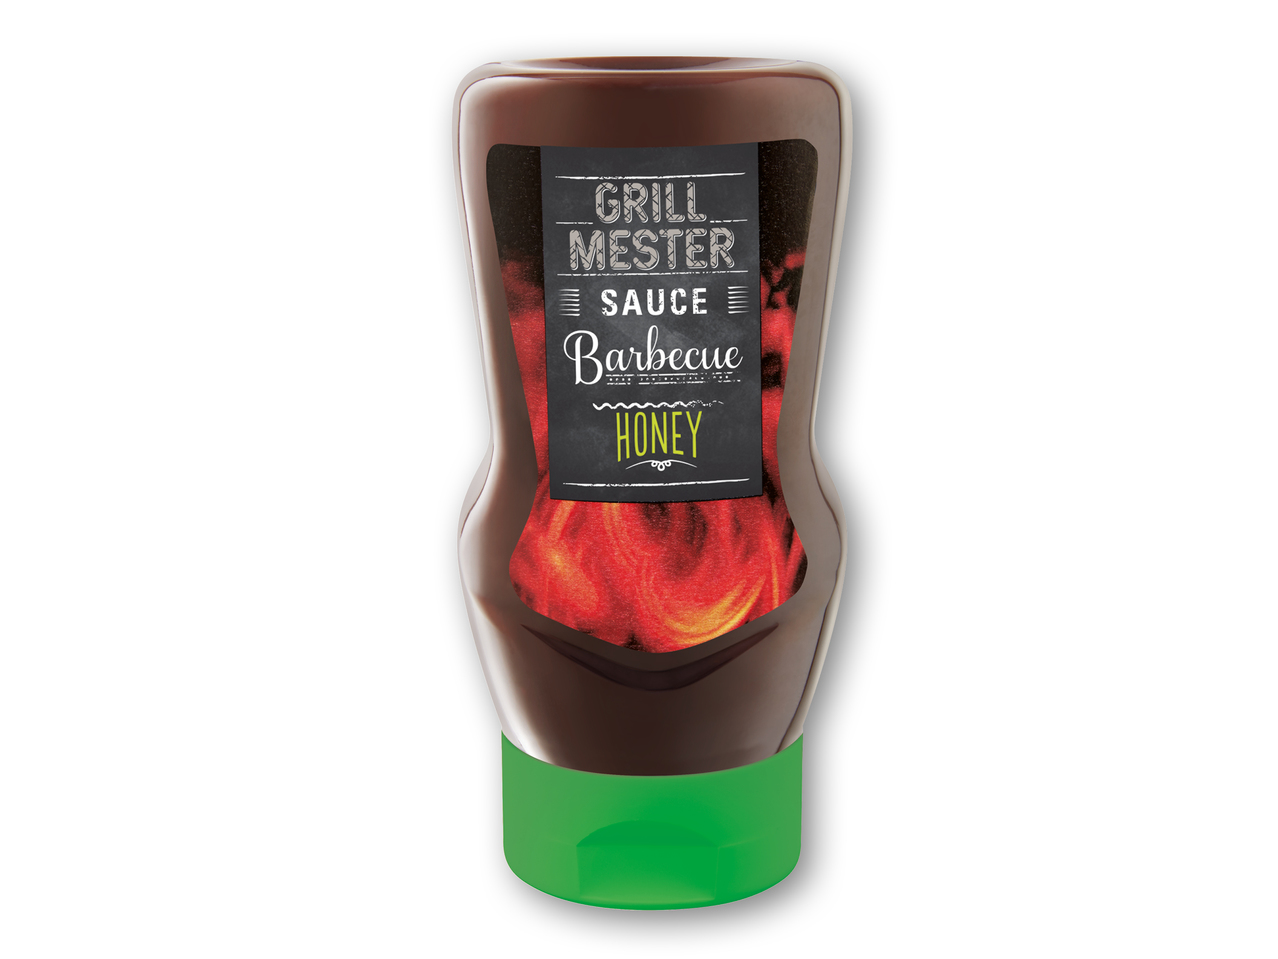 GRILLMESTER Grill-/barbecuesauce